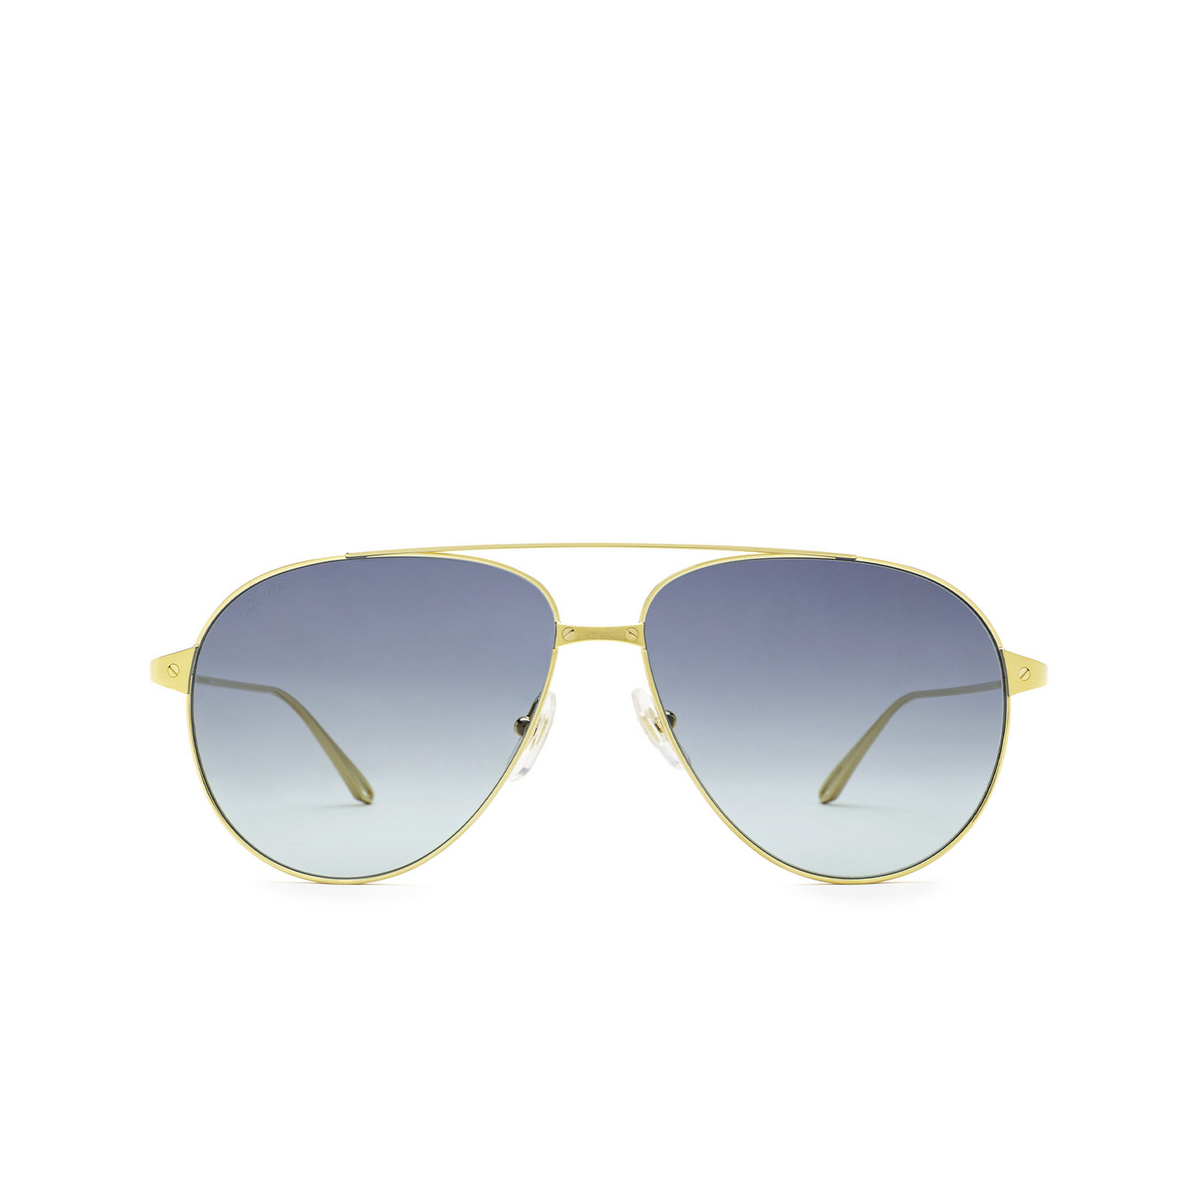 Cartier® Aviator Sunglasses: CT0298S color Gold 009 - front view.